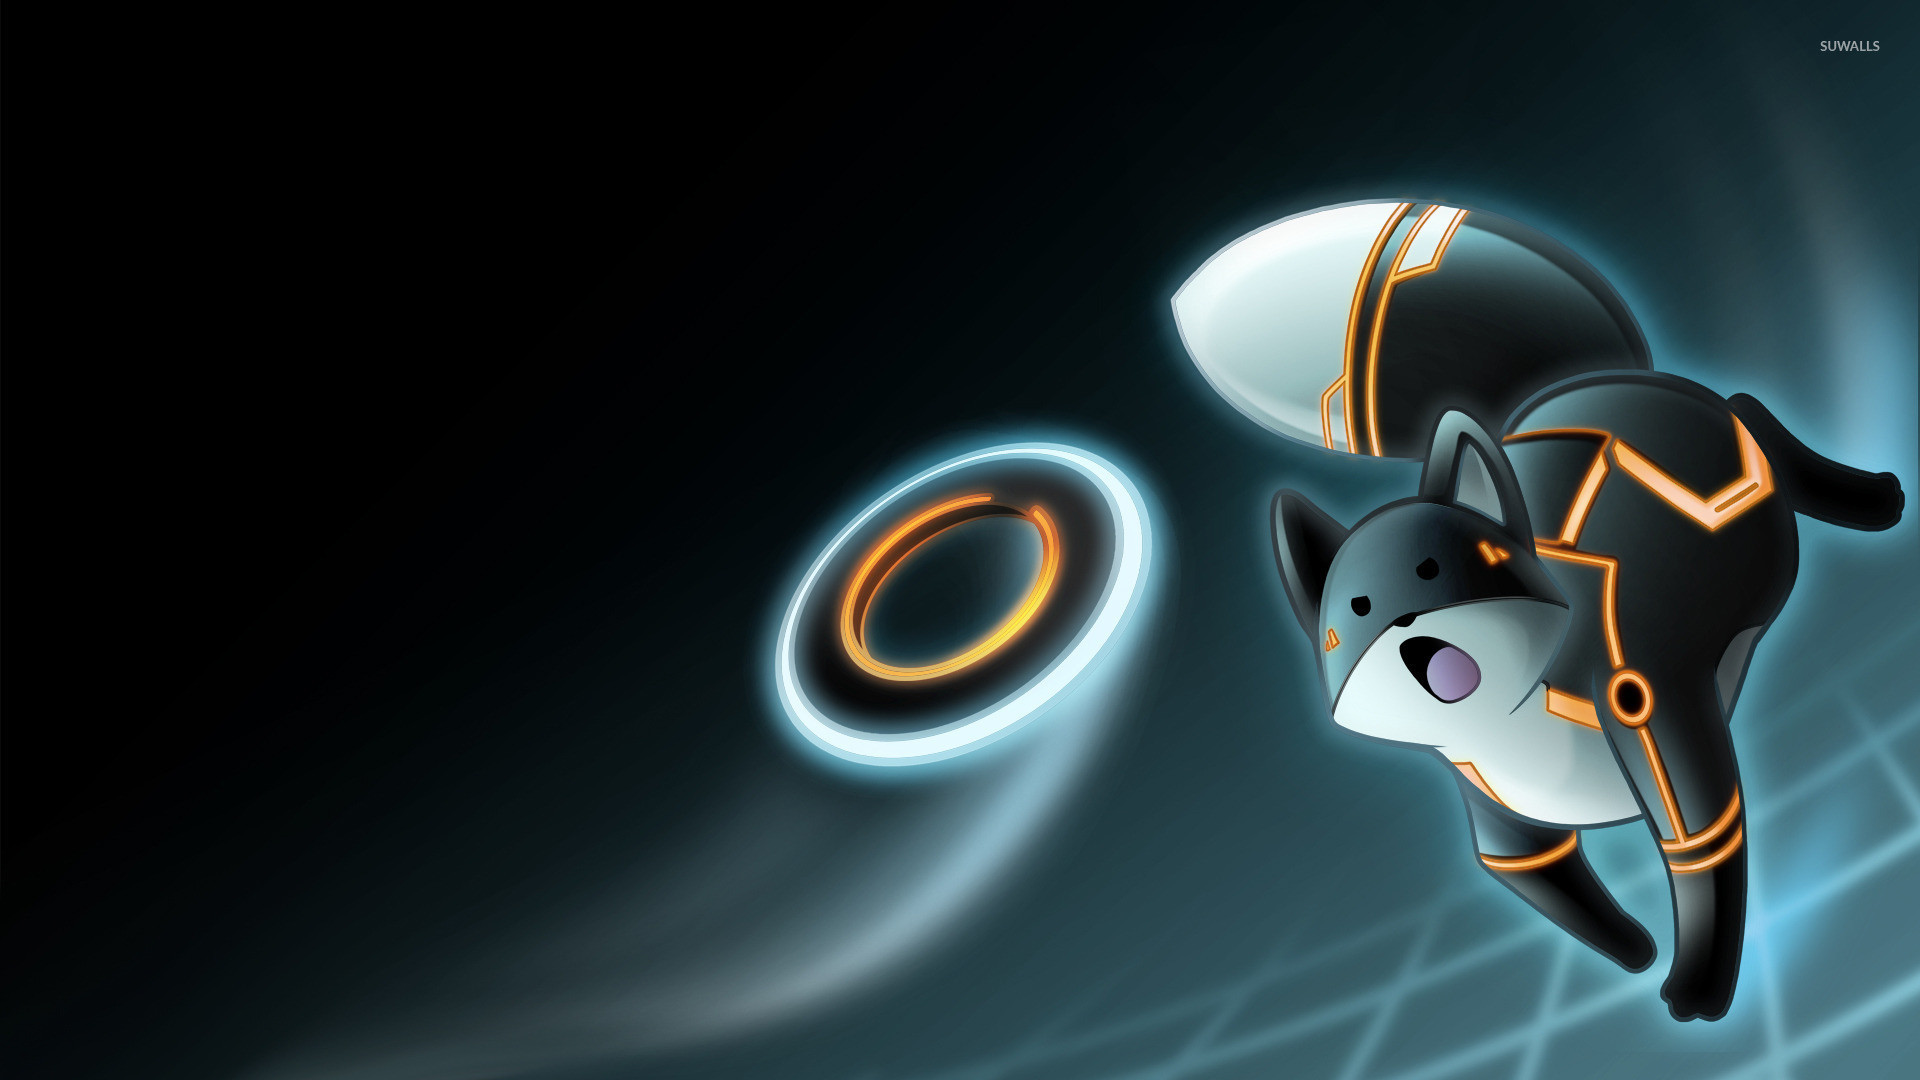 1920x1080  Top Space Cat Wallpaper Images for Pinterest